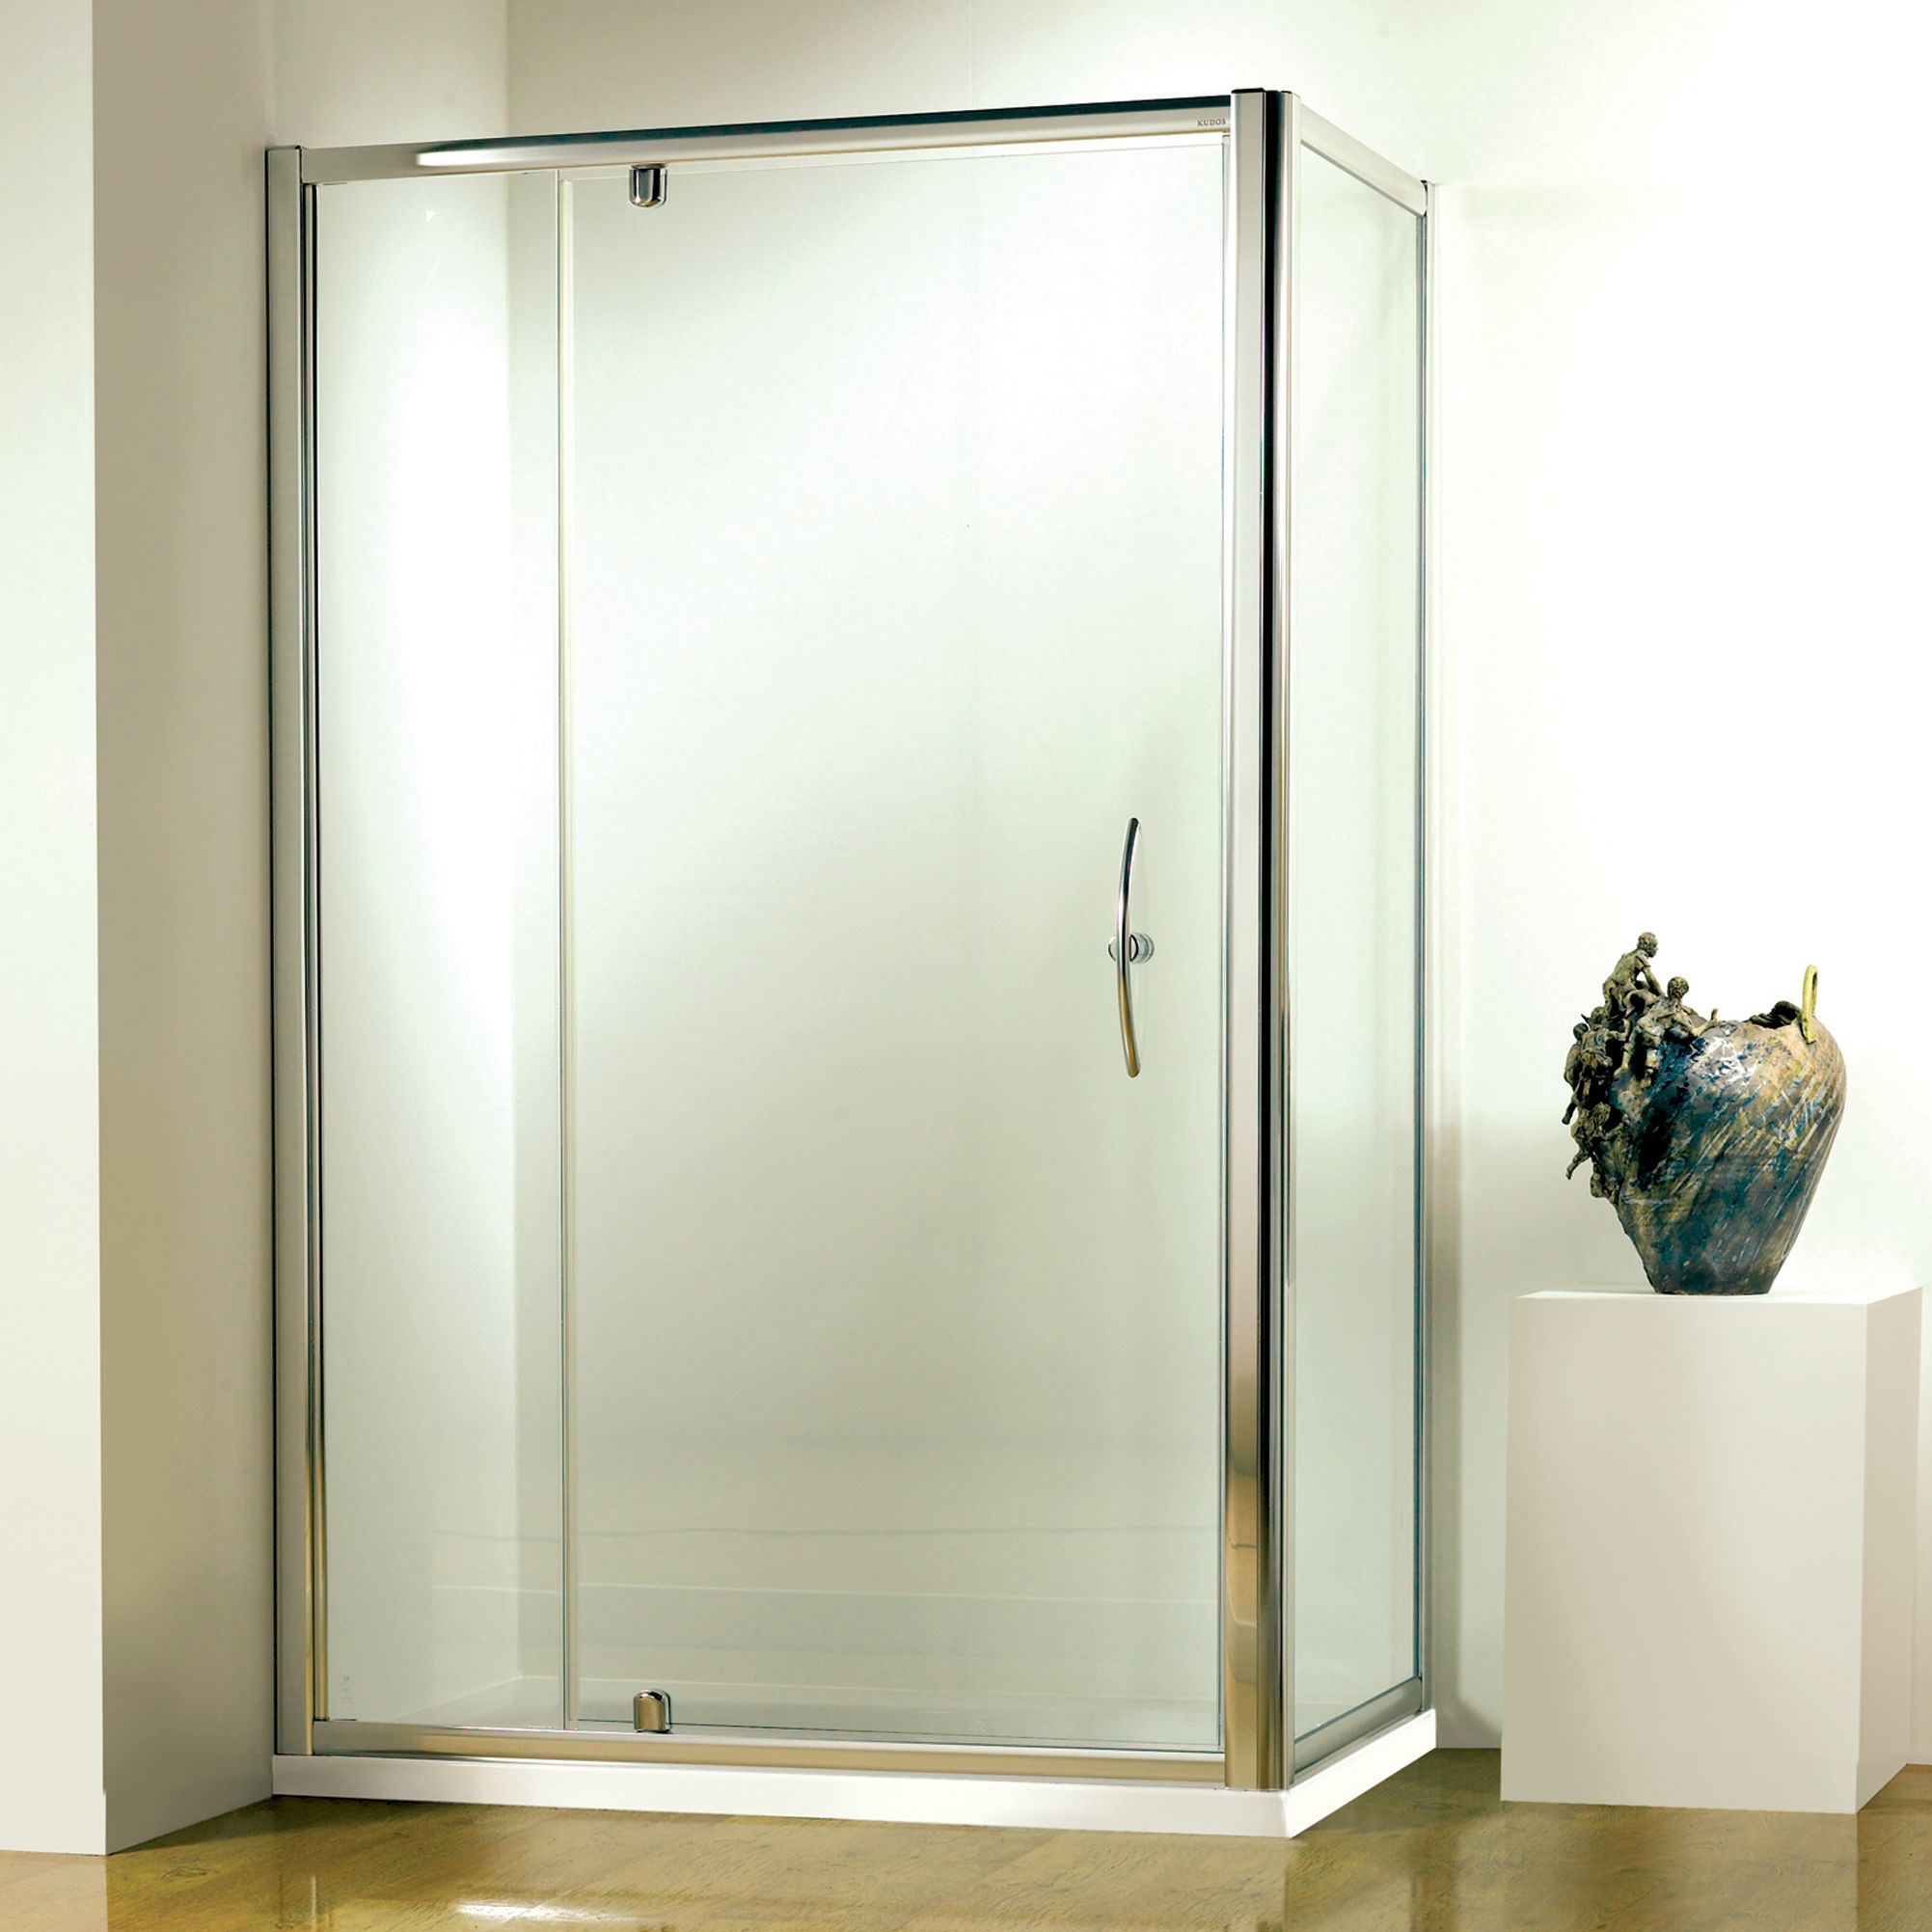 John Lewis & Partners 90 x 90cm Shower Enclosure with Pivot Door and Side Panel